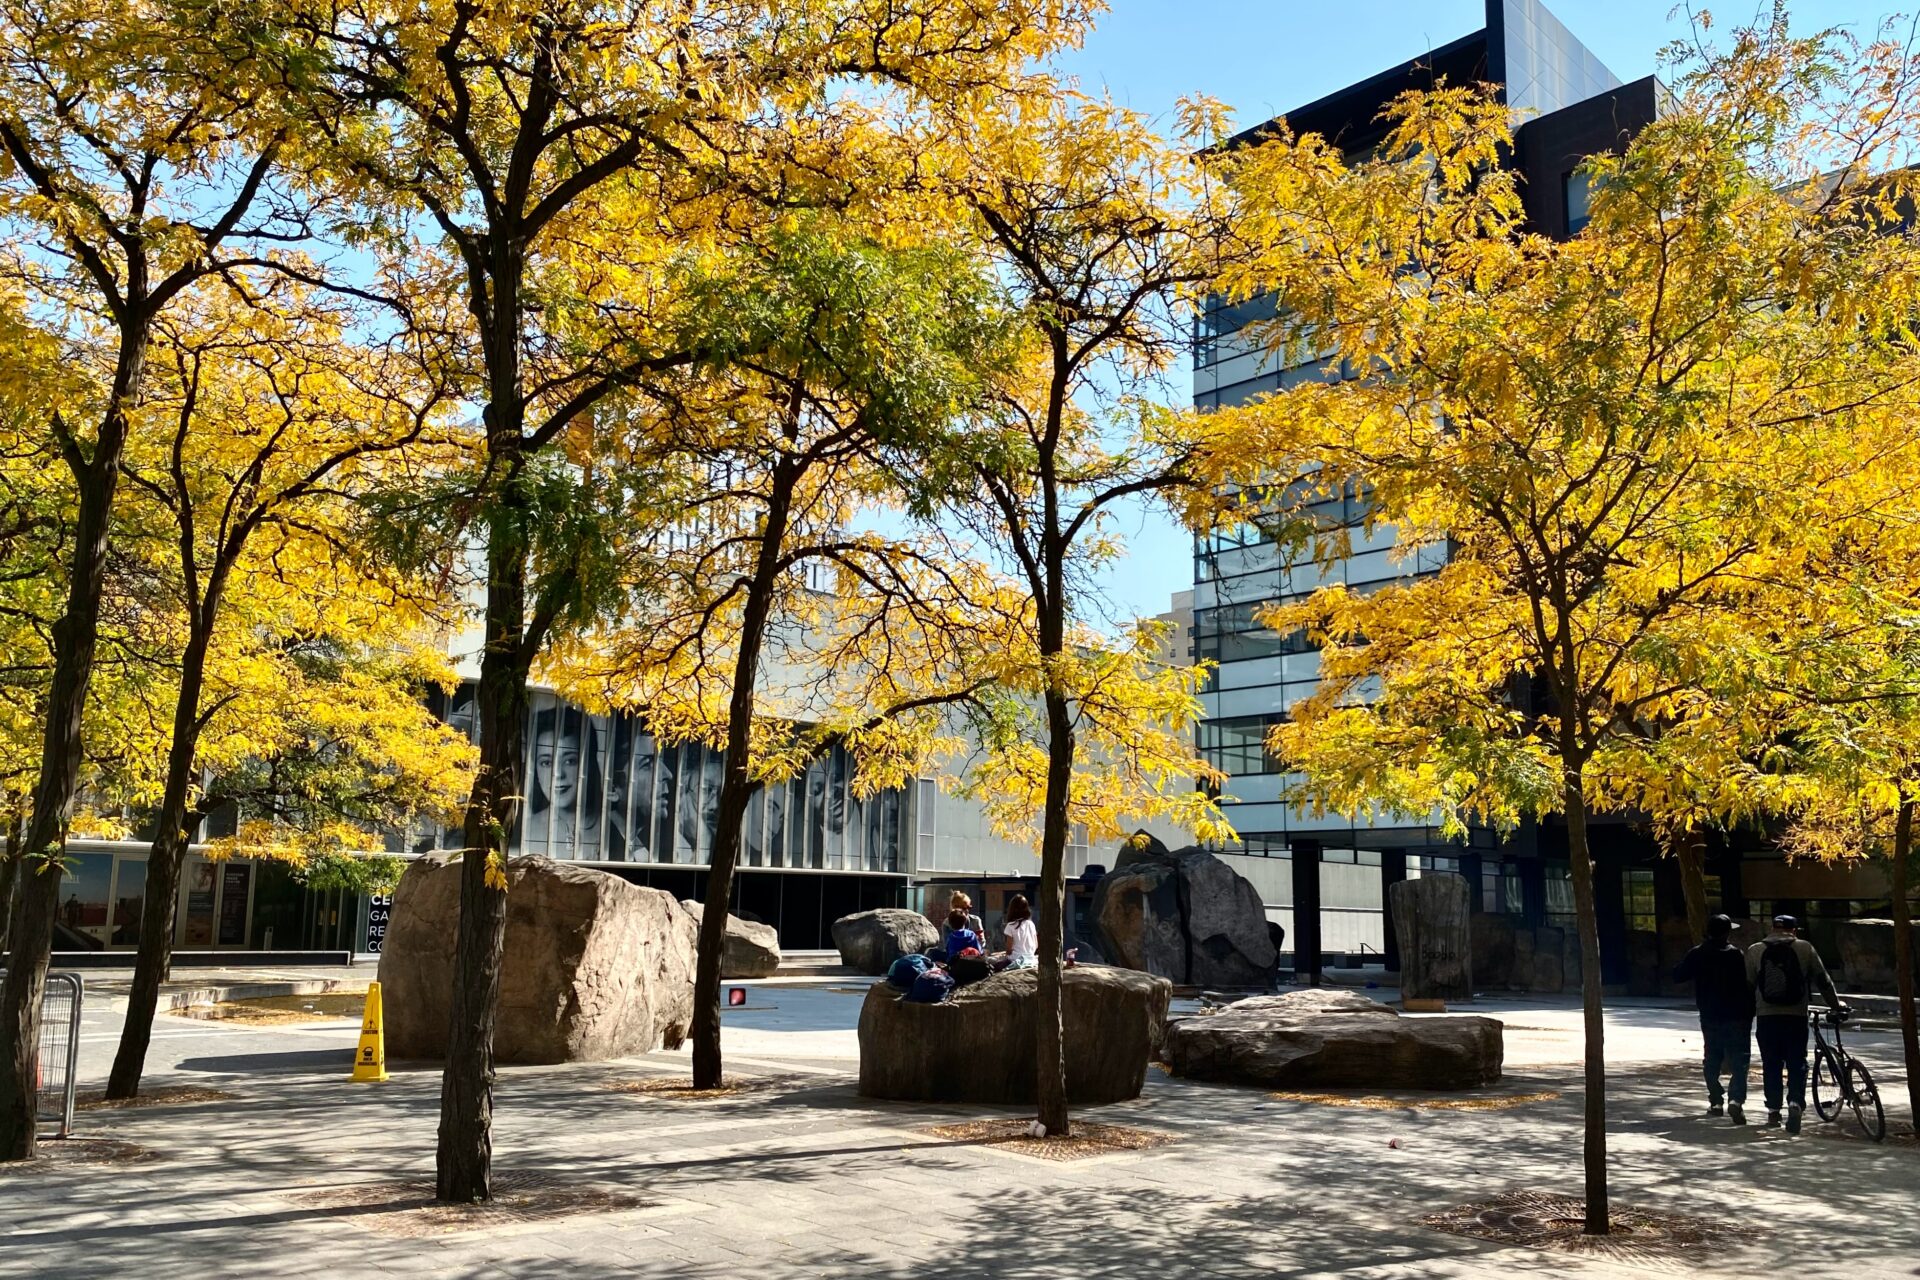 Trees with yellow leaves surround a background of buildings on grey concrete.